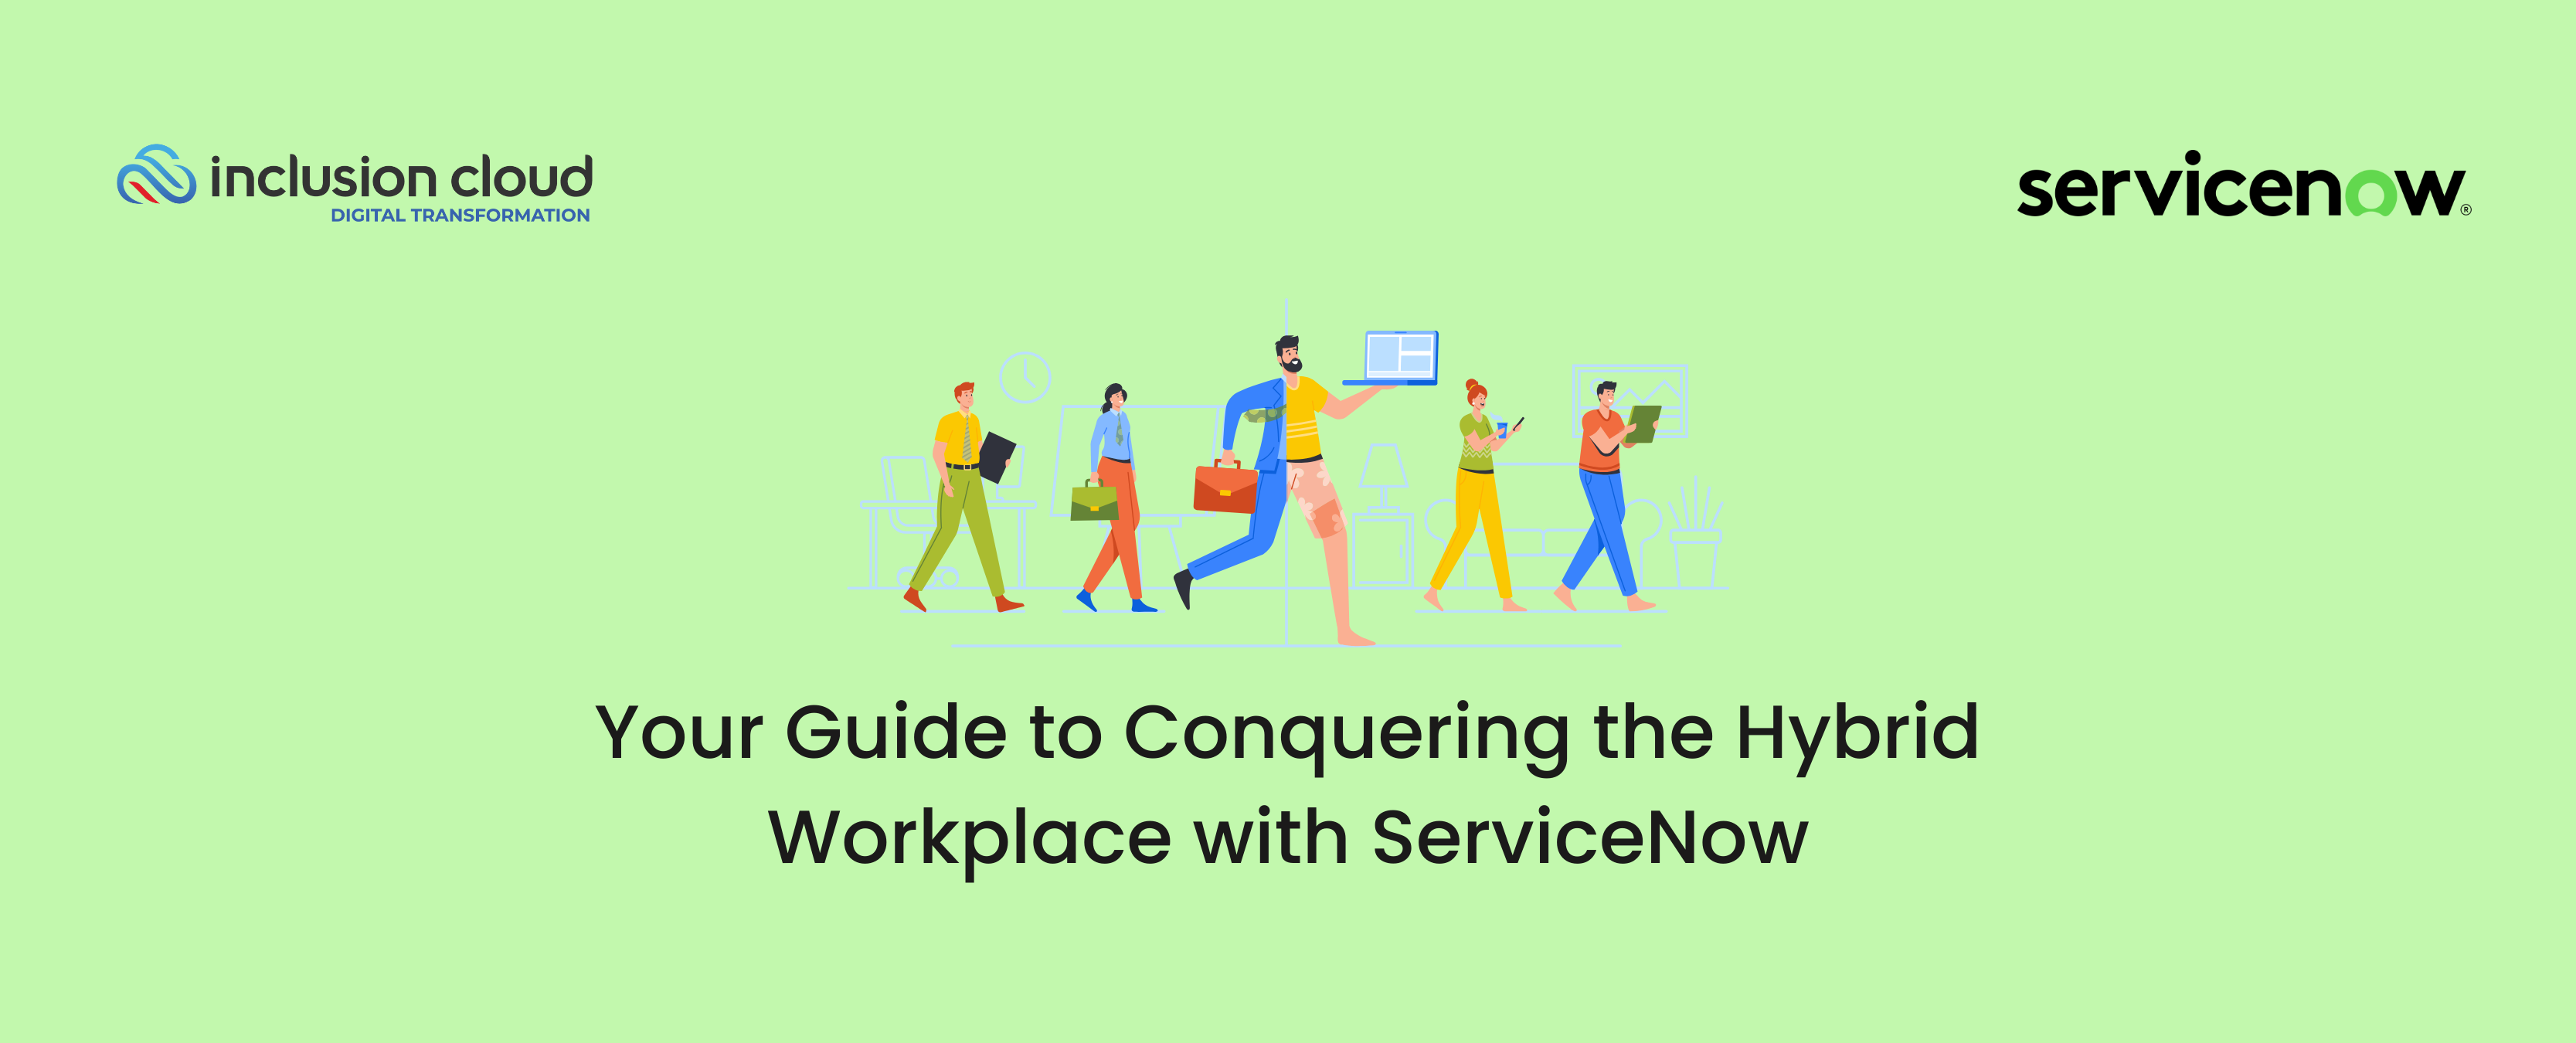 Your Guide to Conquering the Hybrid Workplace with ServiceNow